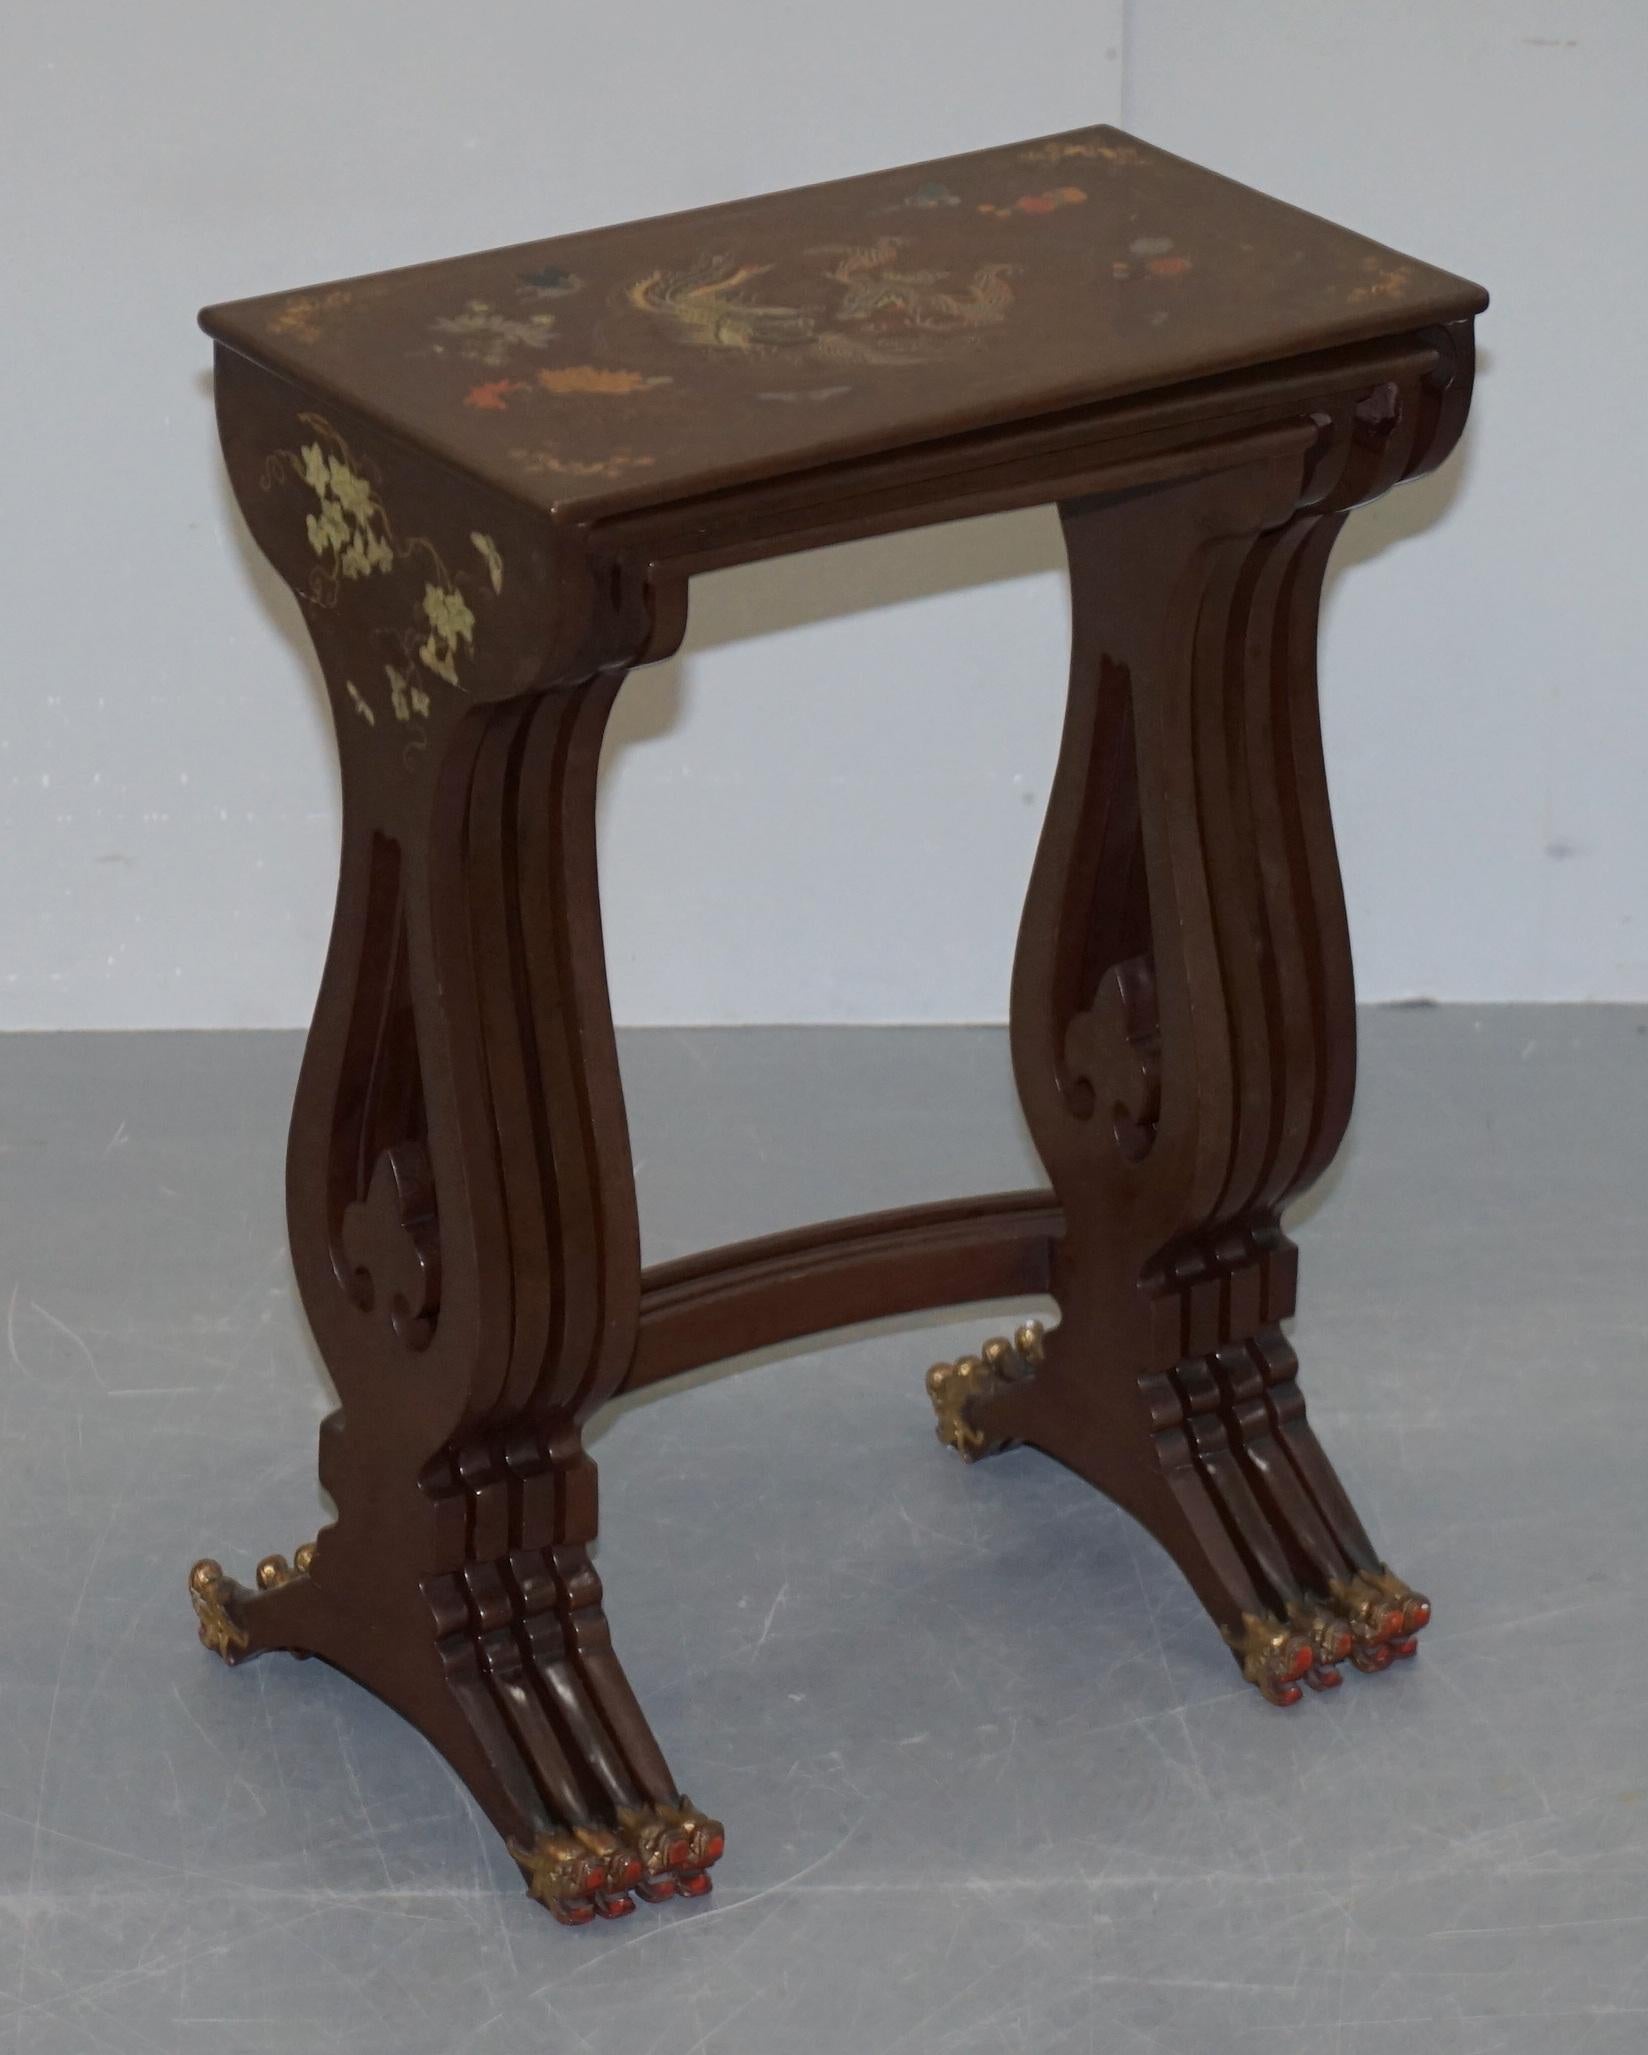 We are delighted to offer for sale this sublime nest of four original Chinese brown lacquered tables with dragon carved feet and gold leaf detailing

A good looking, decorative and well made set, they are totally original and unrestored, the brown